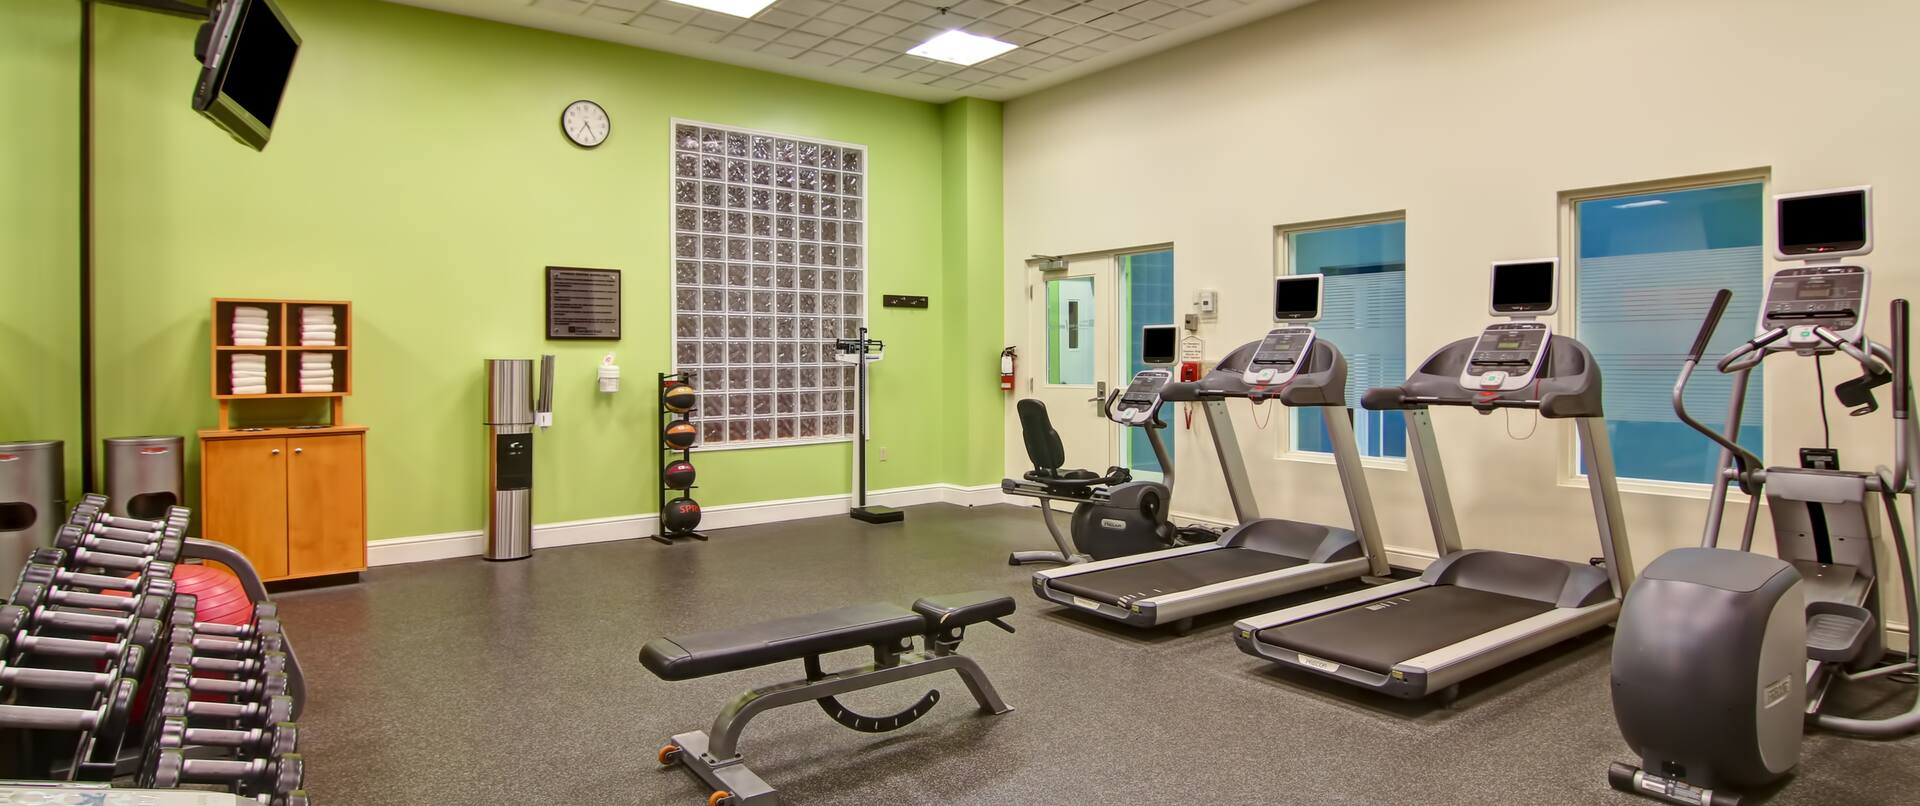 Fitness Center With Towel Station, Water Cooler, Weight Balls, Scale, Bench, Cardio Equipment, TVs Above Free Weights, and Red Stability Ball